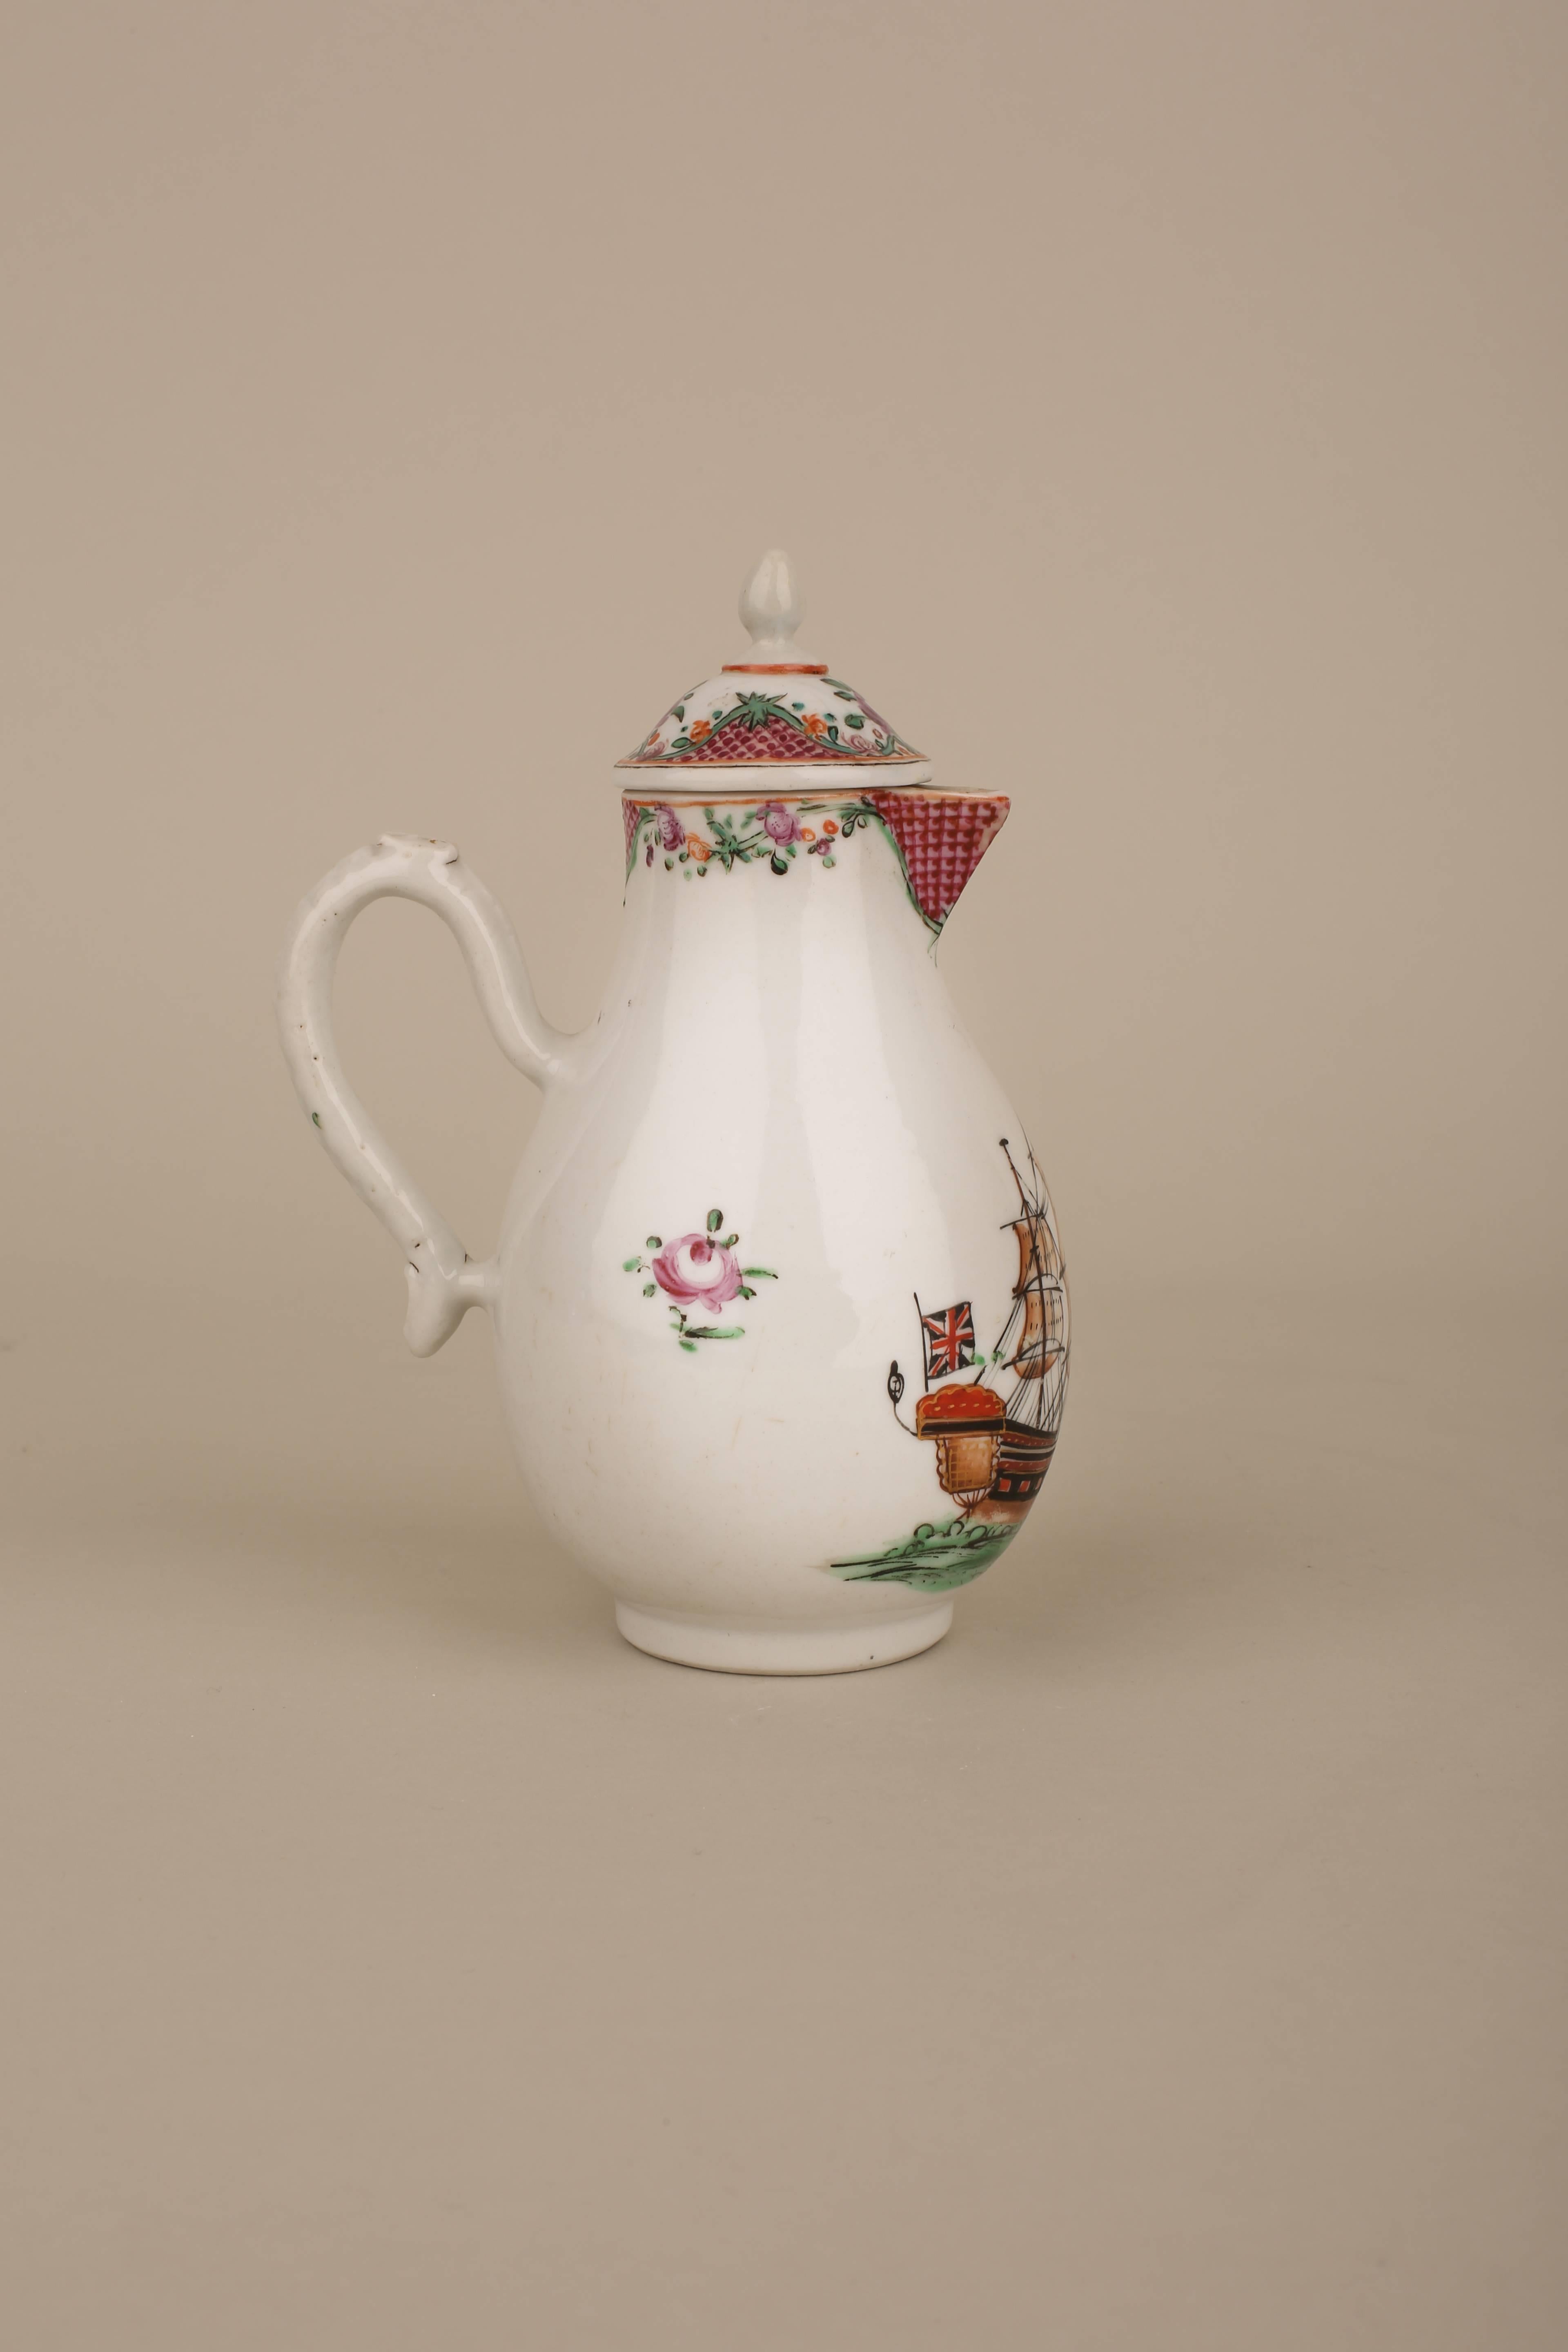 Qing Chinese Porcelain Famille Rose Cream Jug, English Sailing Ship, 18th Century For Sale